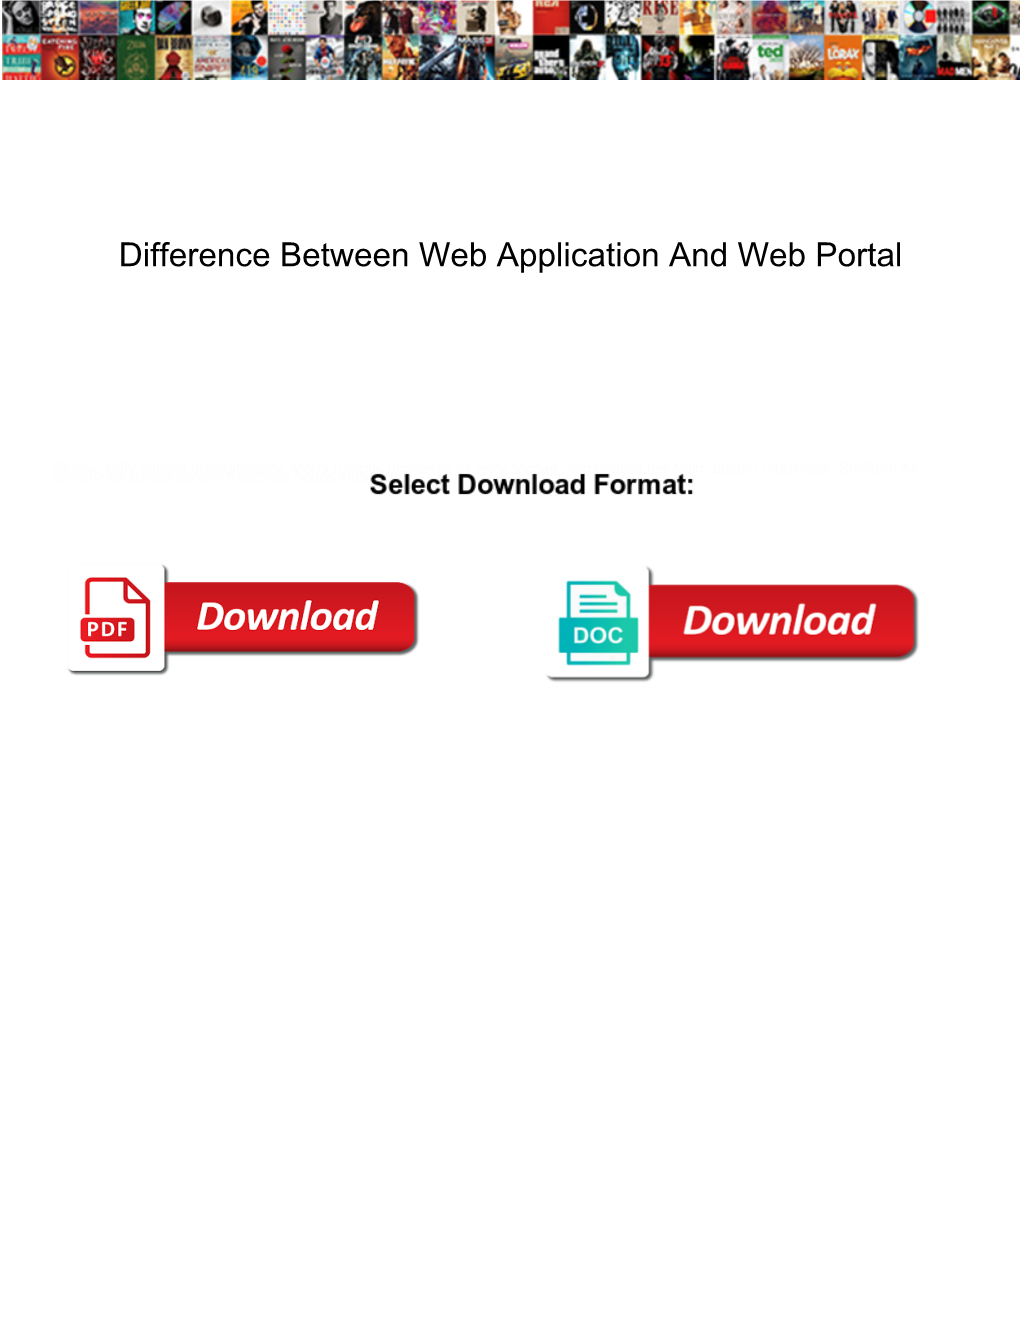 Difference Between Web Application and Web Portal